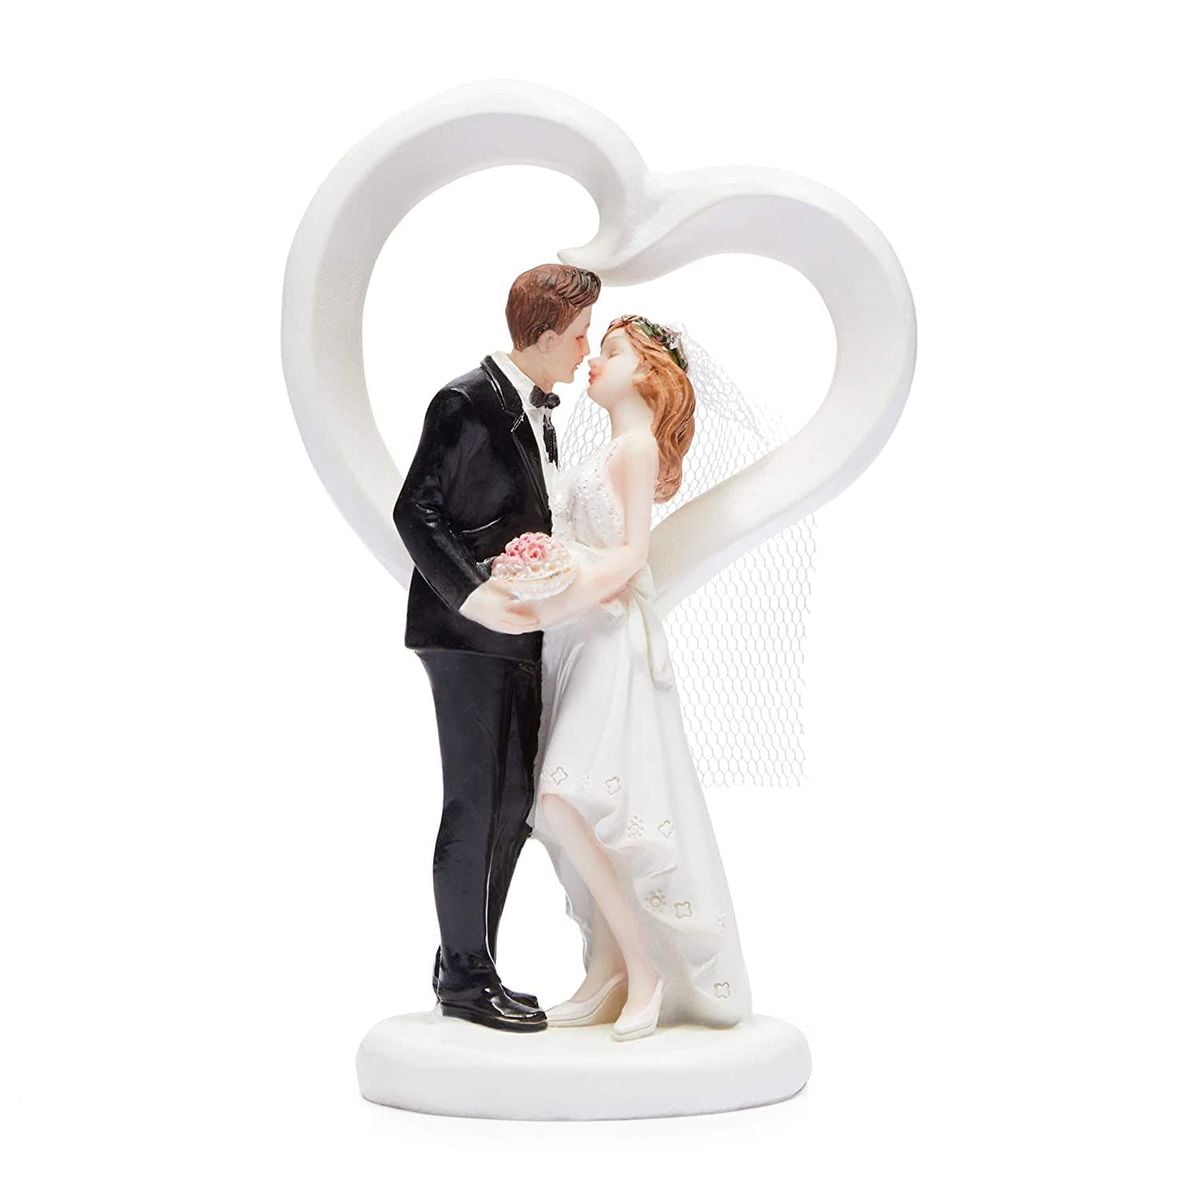 Small Bride & Groom Cake Topper 3 1/4 inches Tall 